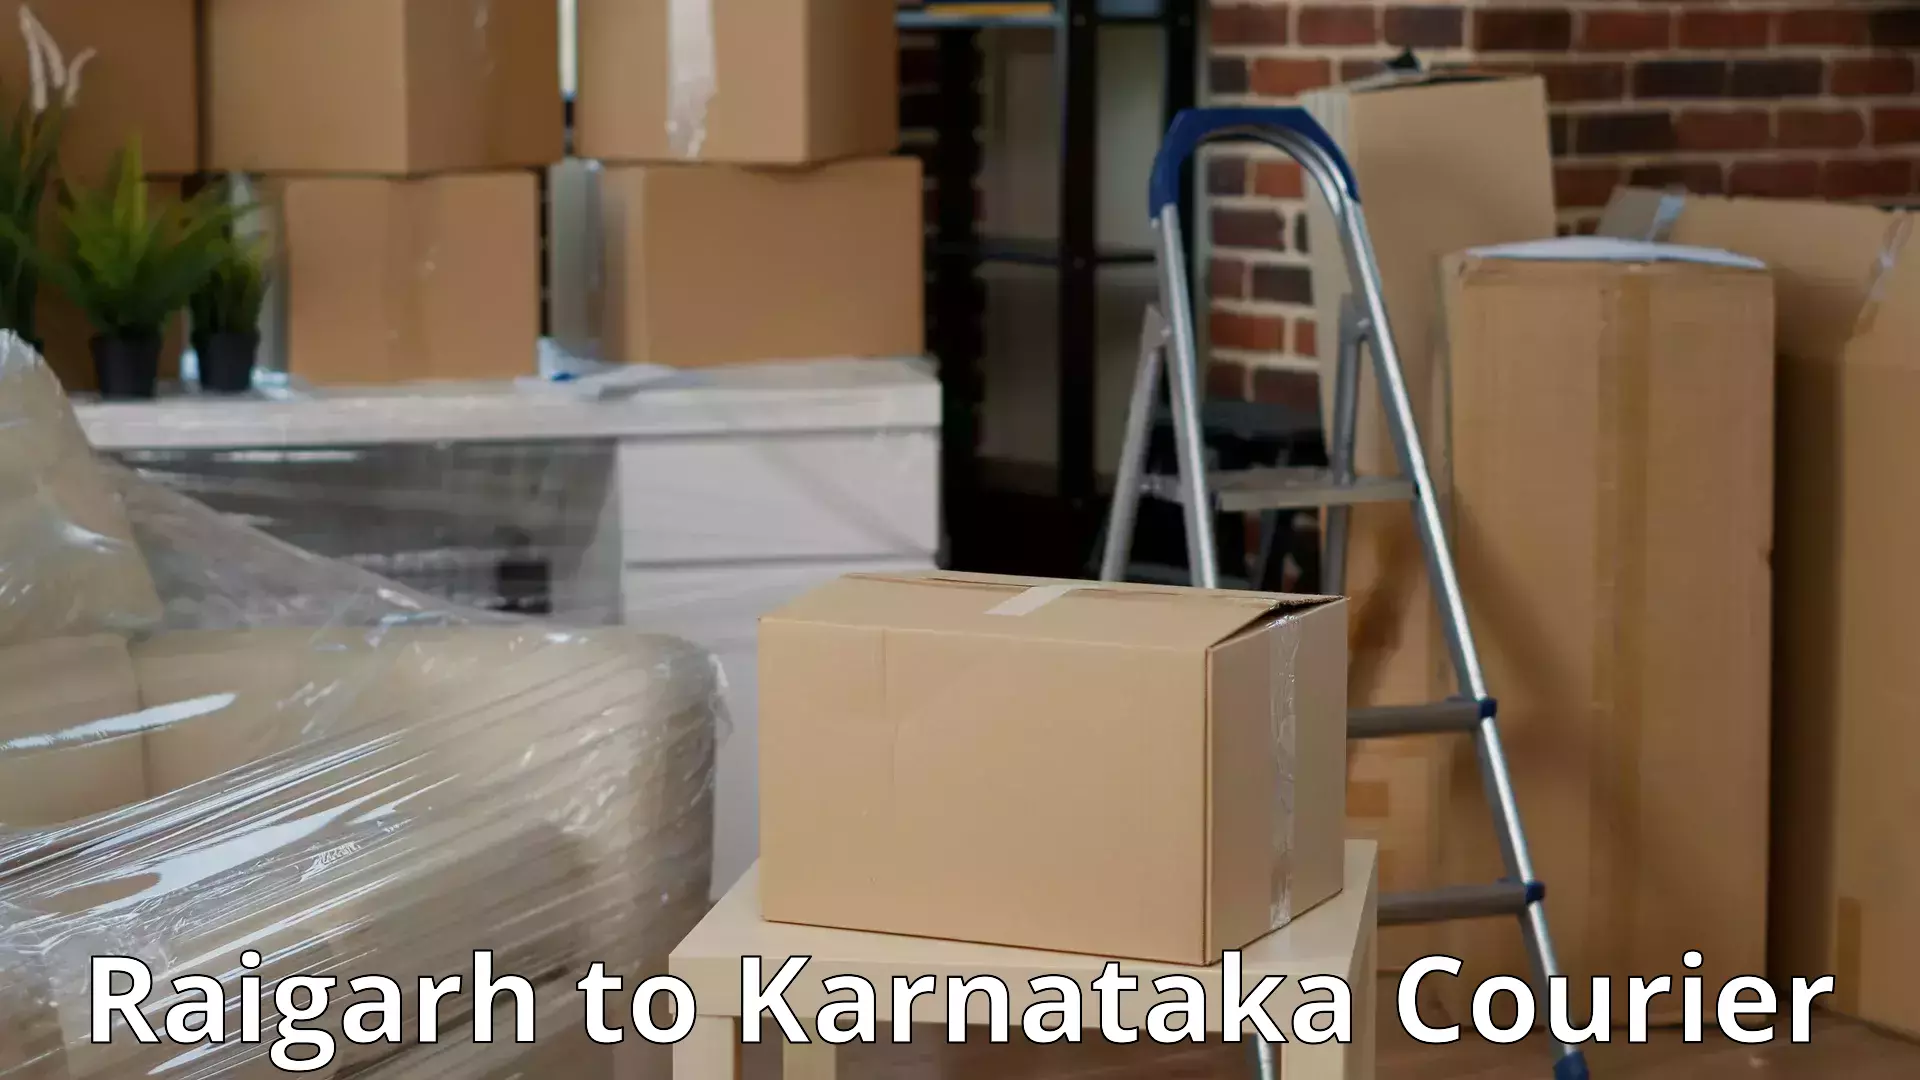 Dependable moving services Raigarh to Yellare